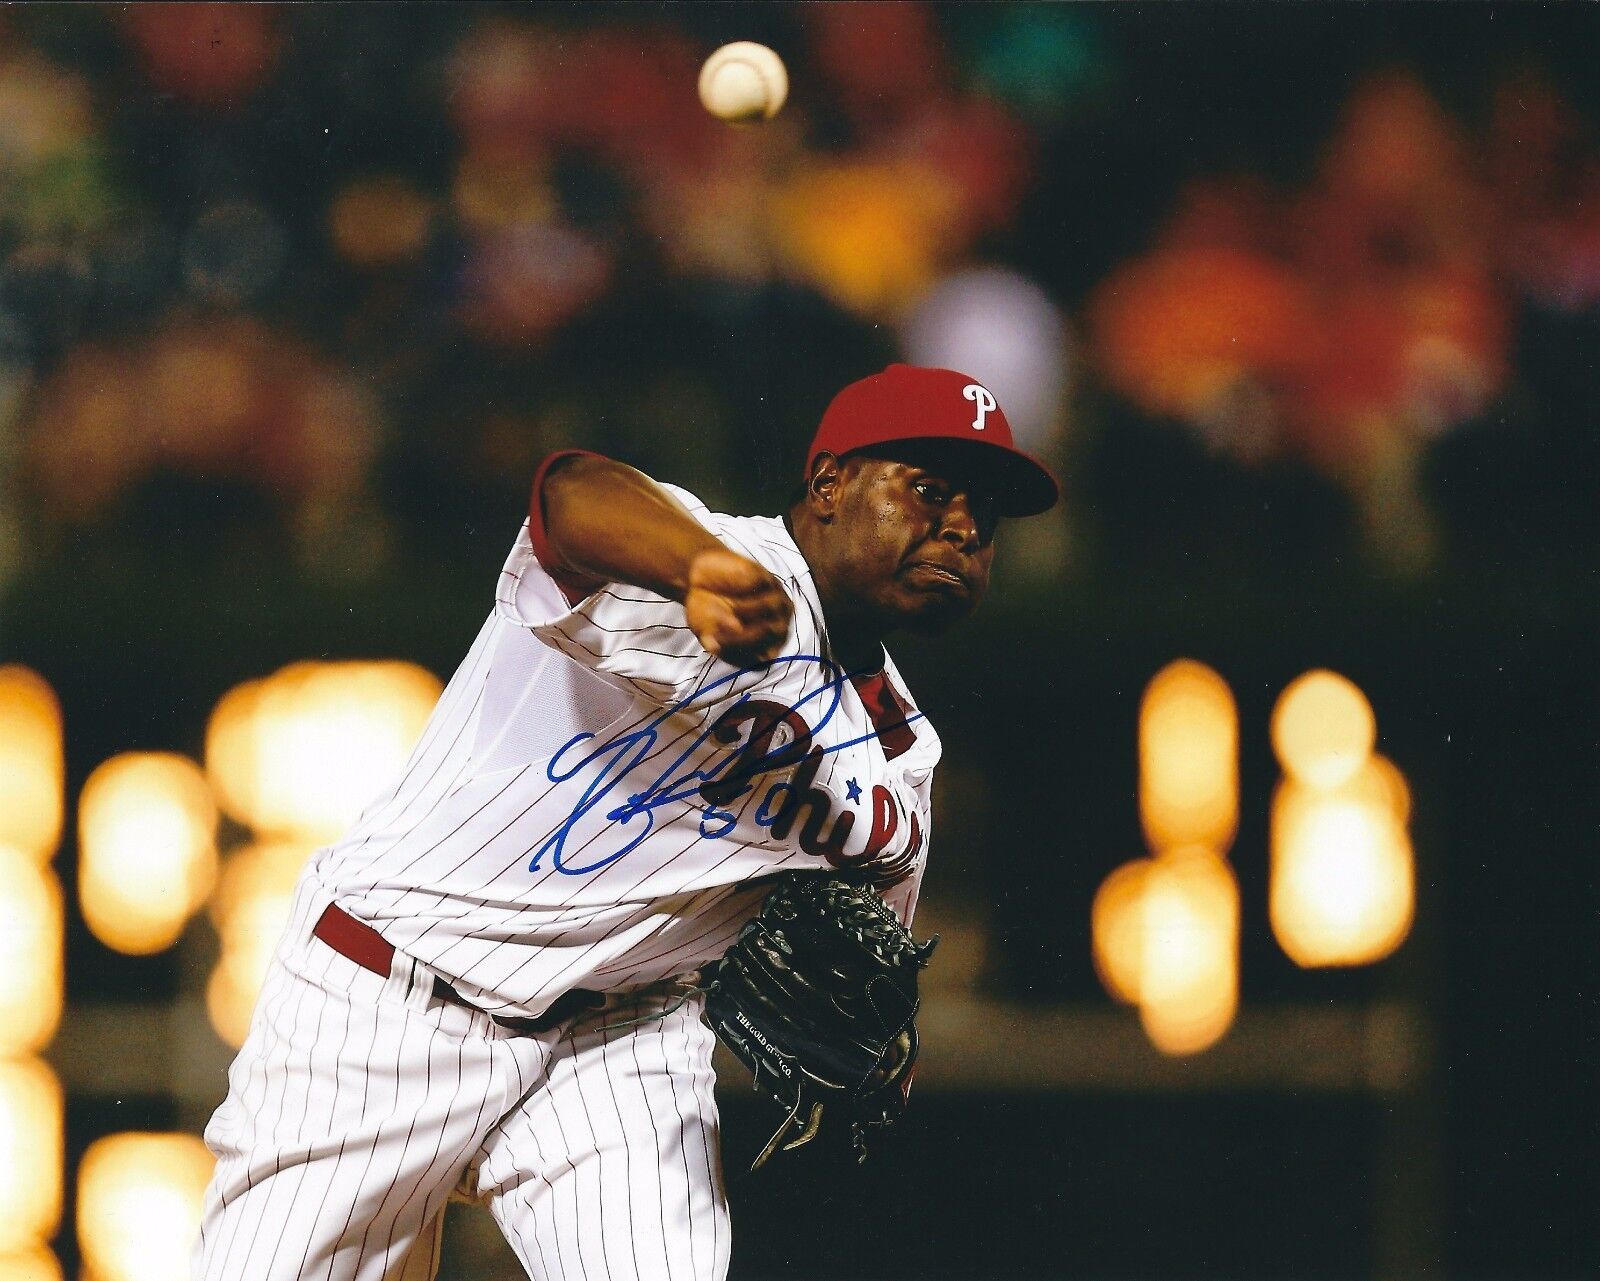 Signed 8x10 HECTOR NERIS Philadelphia Phillies Autographed Photo Poster painting - COA